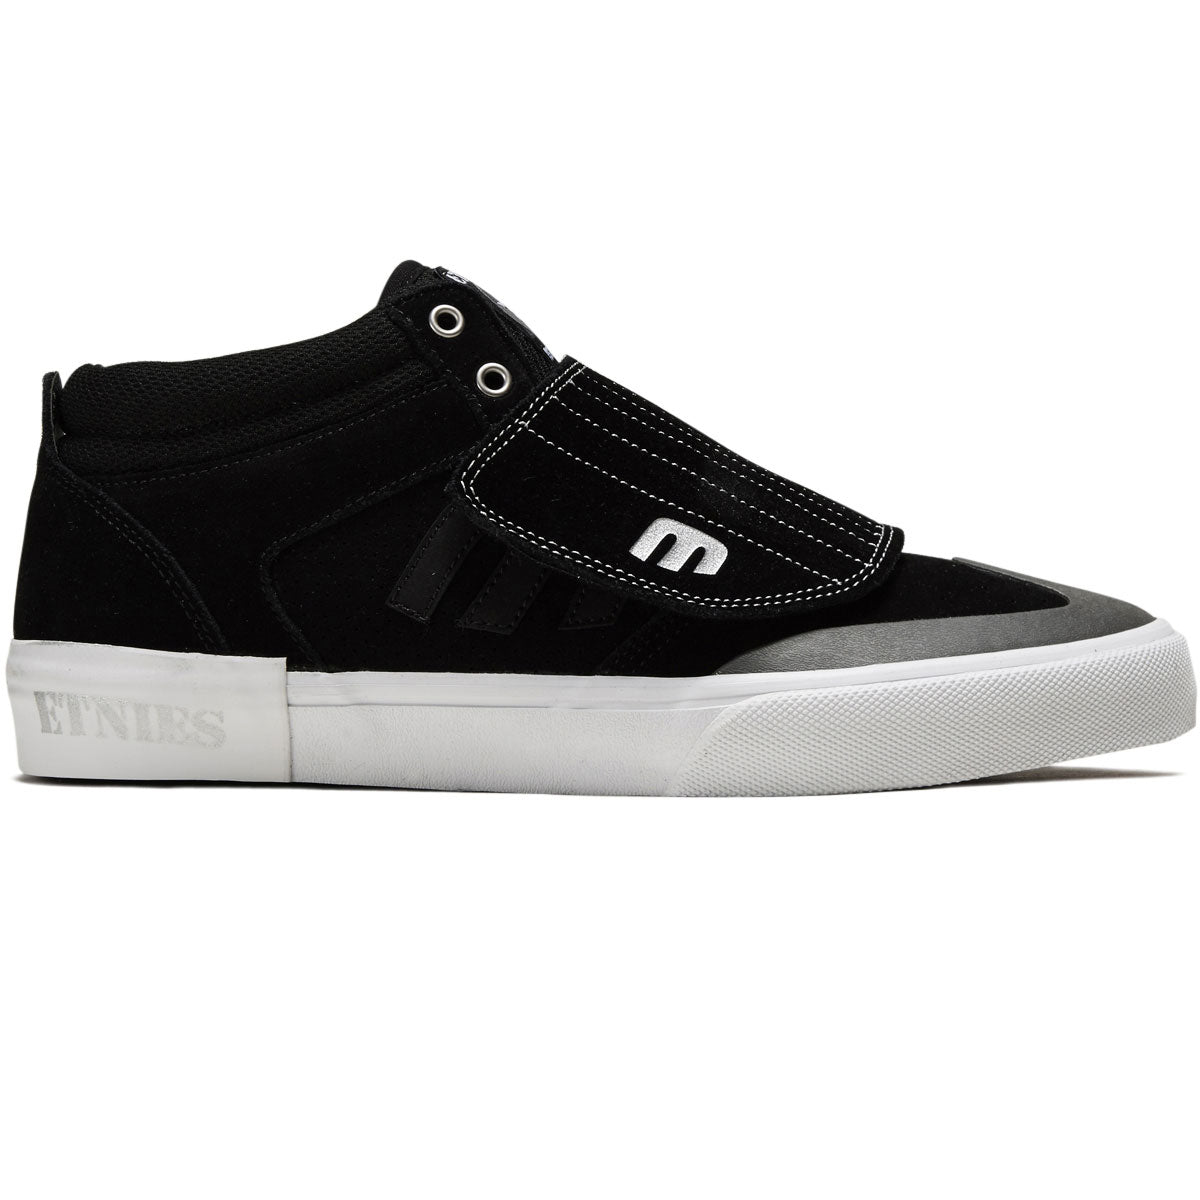 Etnies Windrow Vulc Mid Shoes - Black/White/Silver image 1